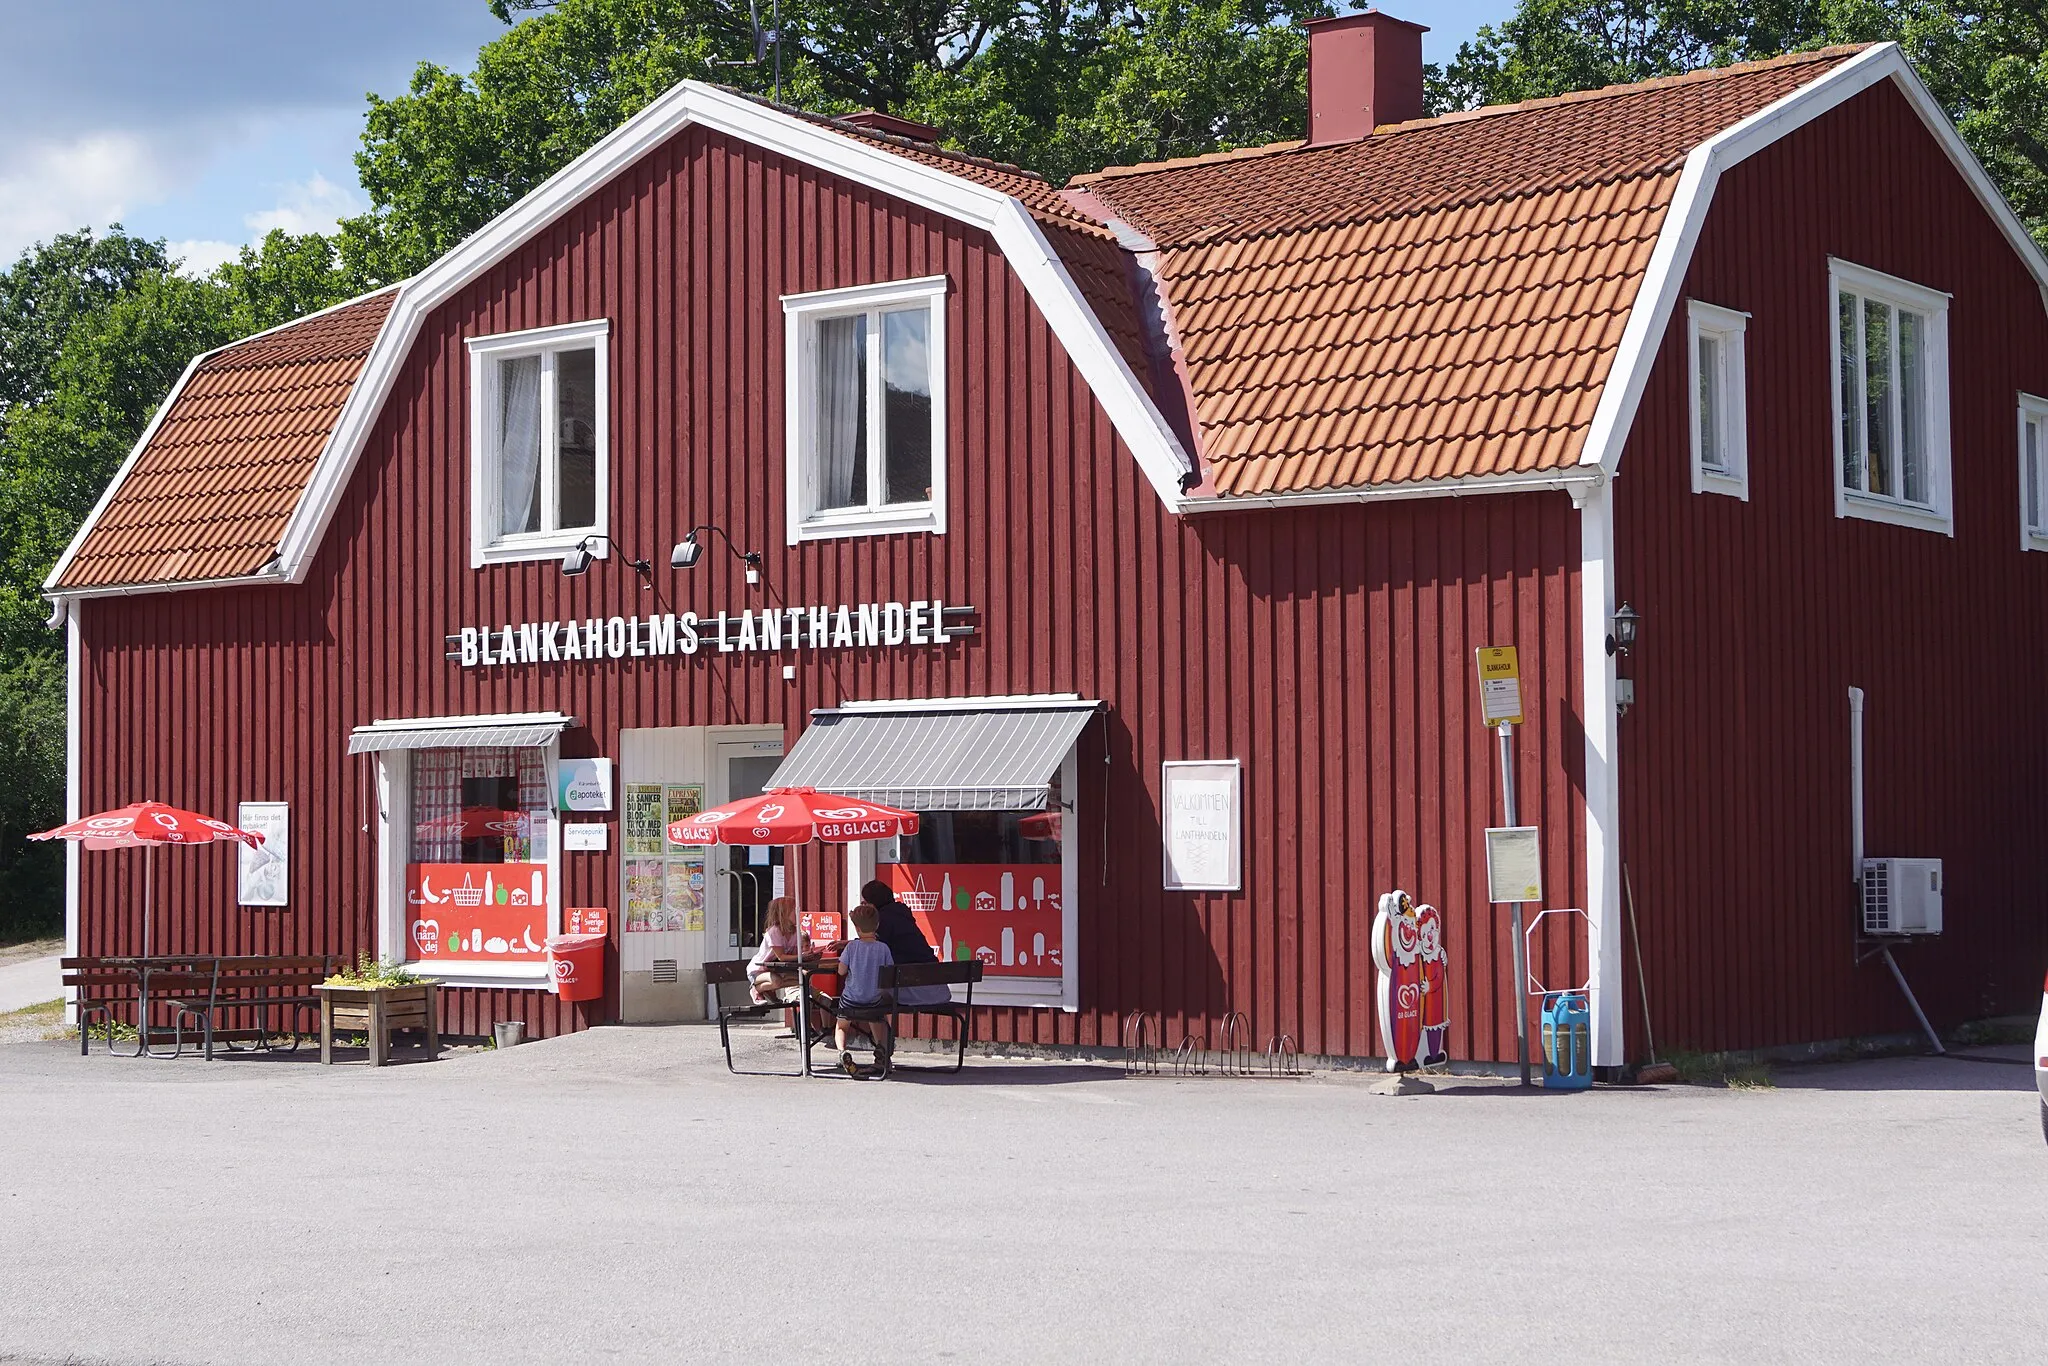 Photo showing: The general store in Blankaholm, Västervik Municipality, Kalmar County, Sweden